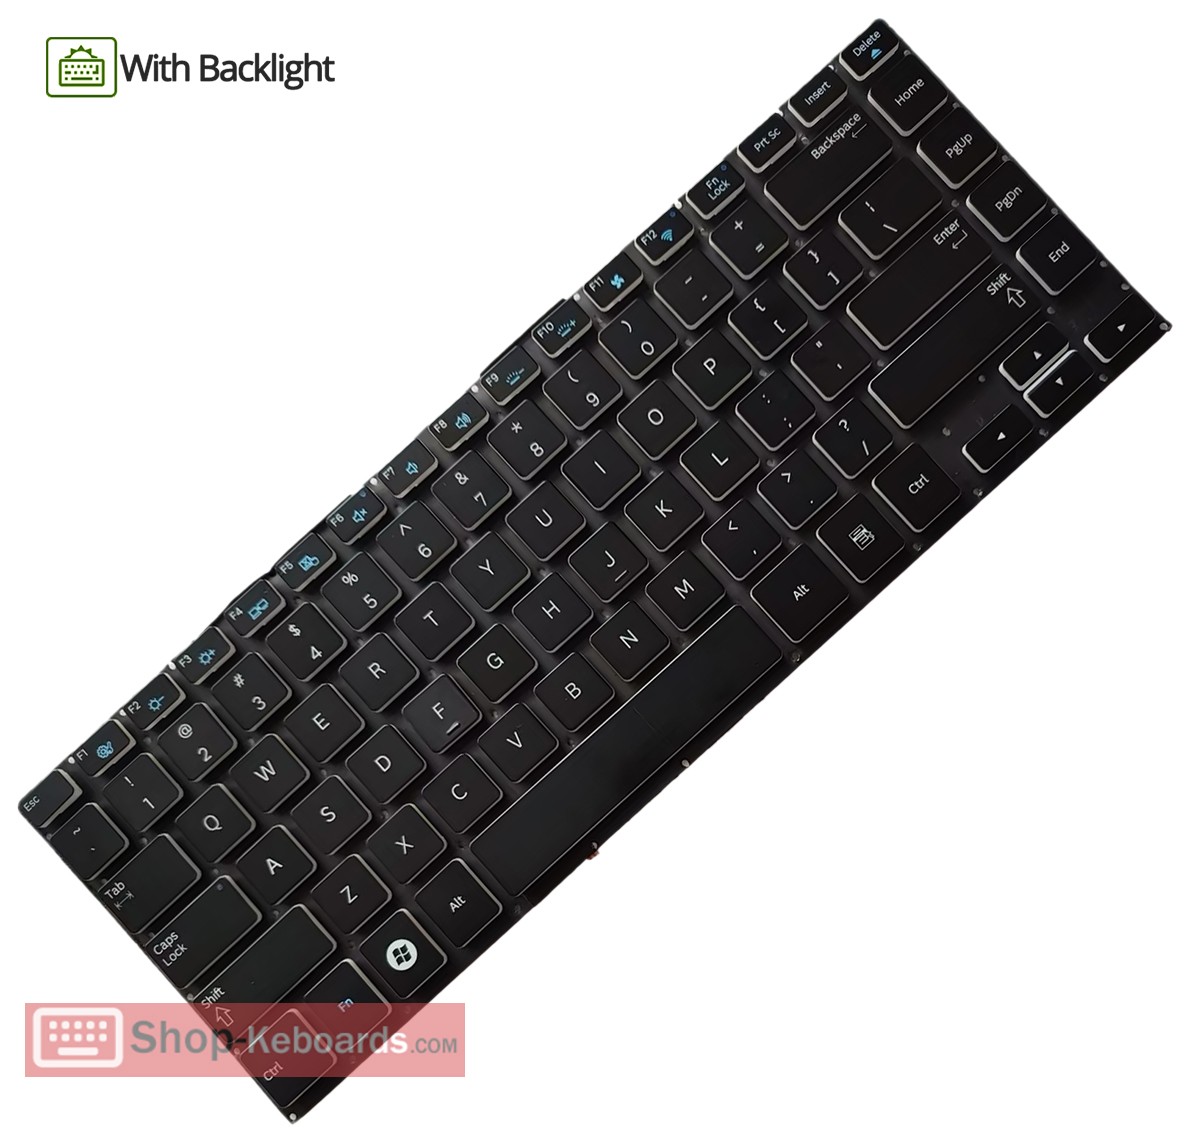 Samsung 700Z4A Keyboard replacement